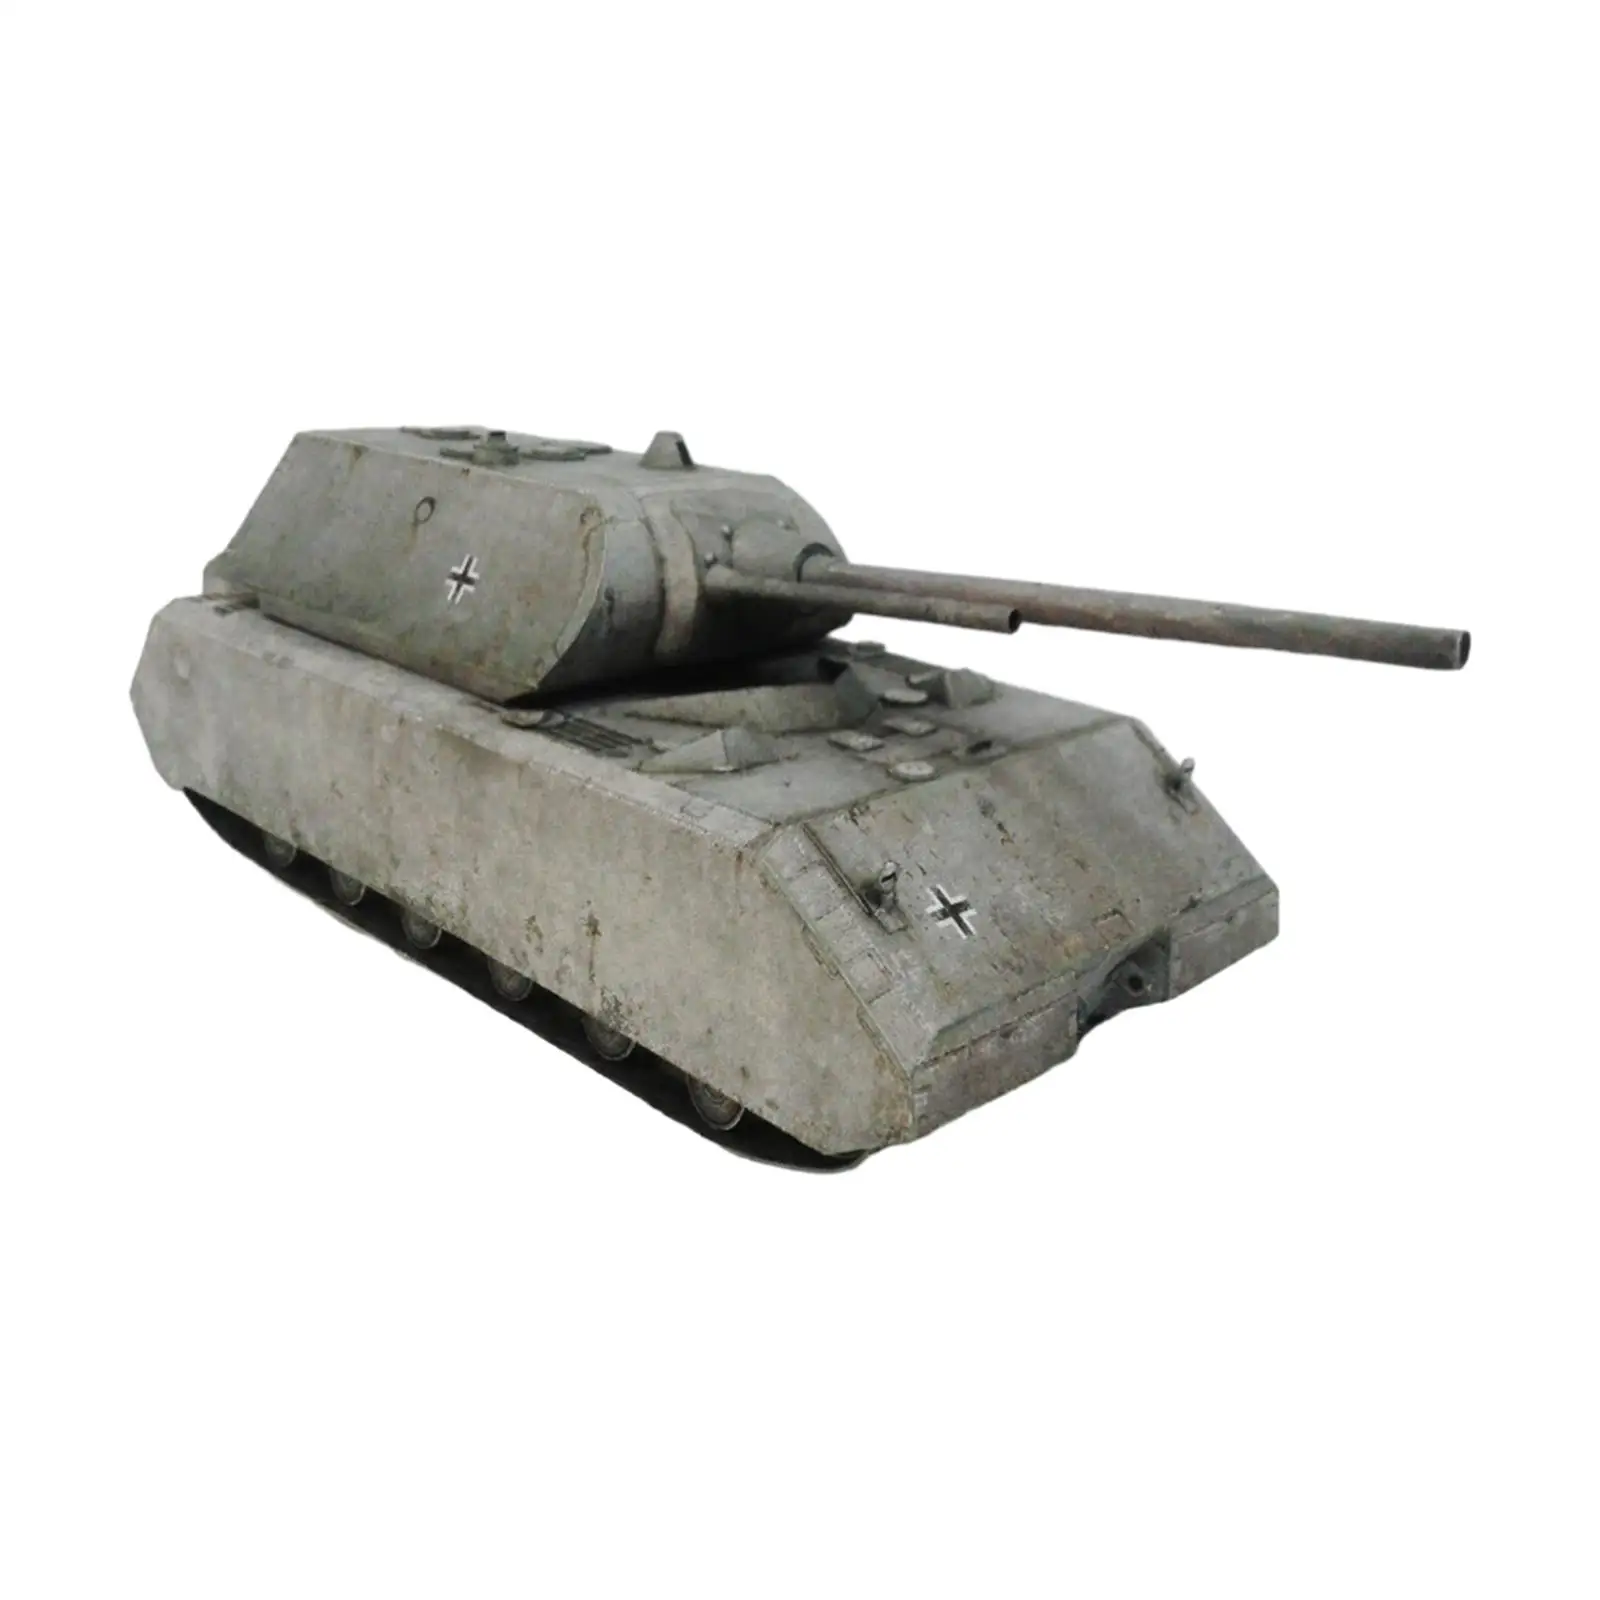 1/35 Tank Model Building Kits Crafts Collections Handmade Miniature Home Decoration 3D Puzzle for Men Women Adults Kids Gifts